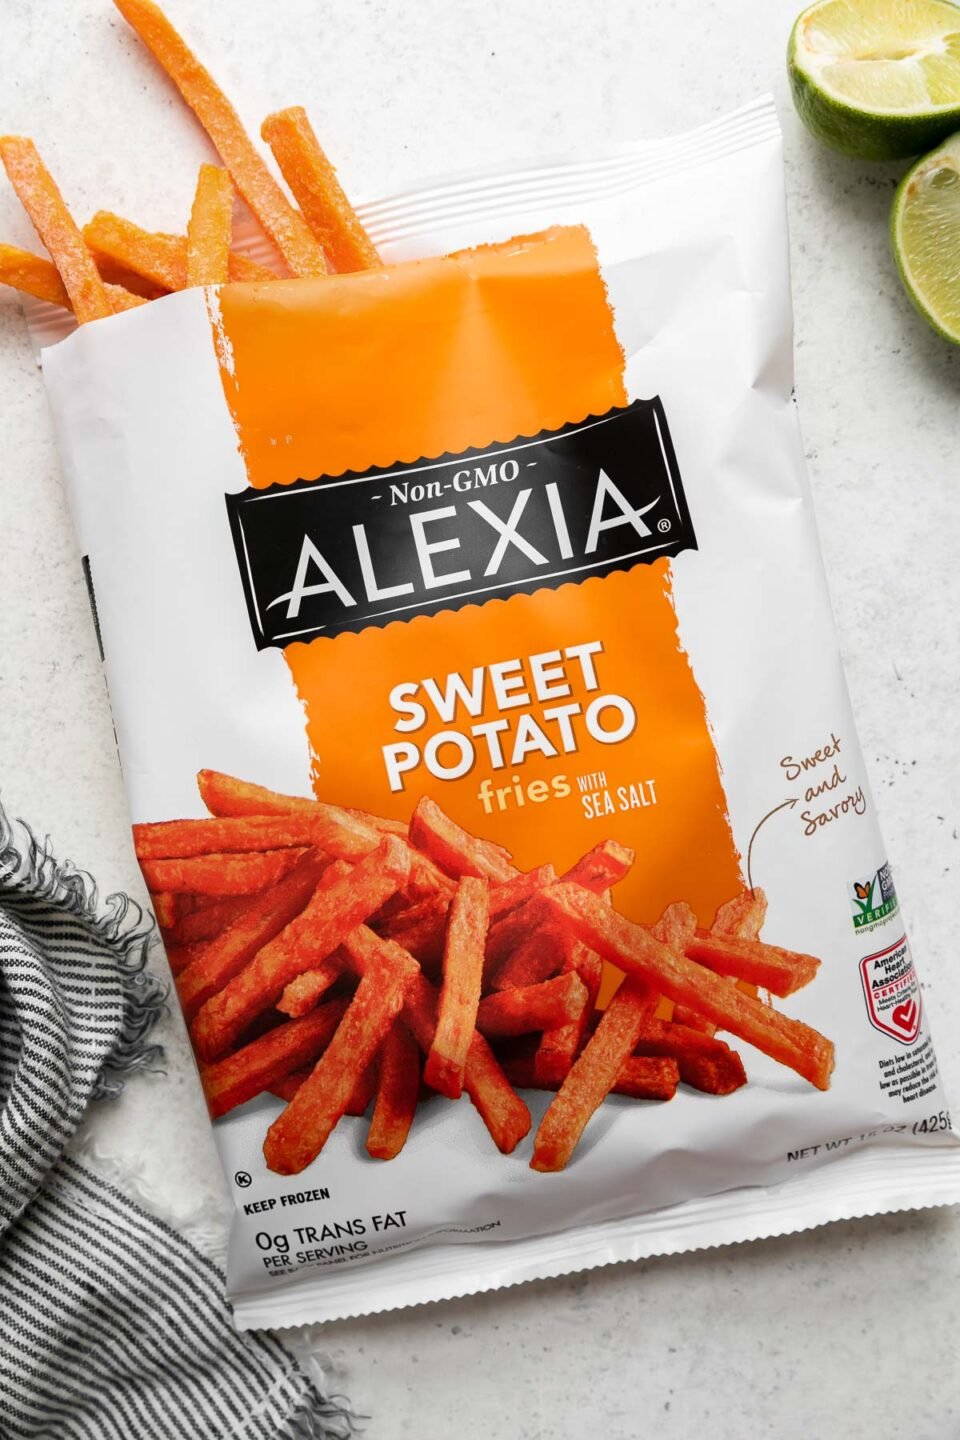 A single bag of Alexia Sweet Potato Fries with Sea Salt rest atop a creamy white textured surface. The bag has been cut open and a handful of frozen sweet potato fries peek up out of the bag. Two lime halves and a blue and white striped linen napkin surround the bag of frozen sweet potato fries.